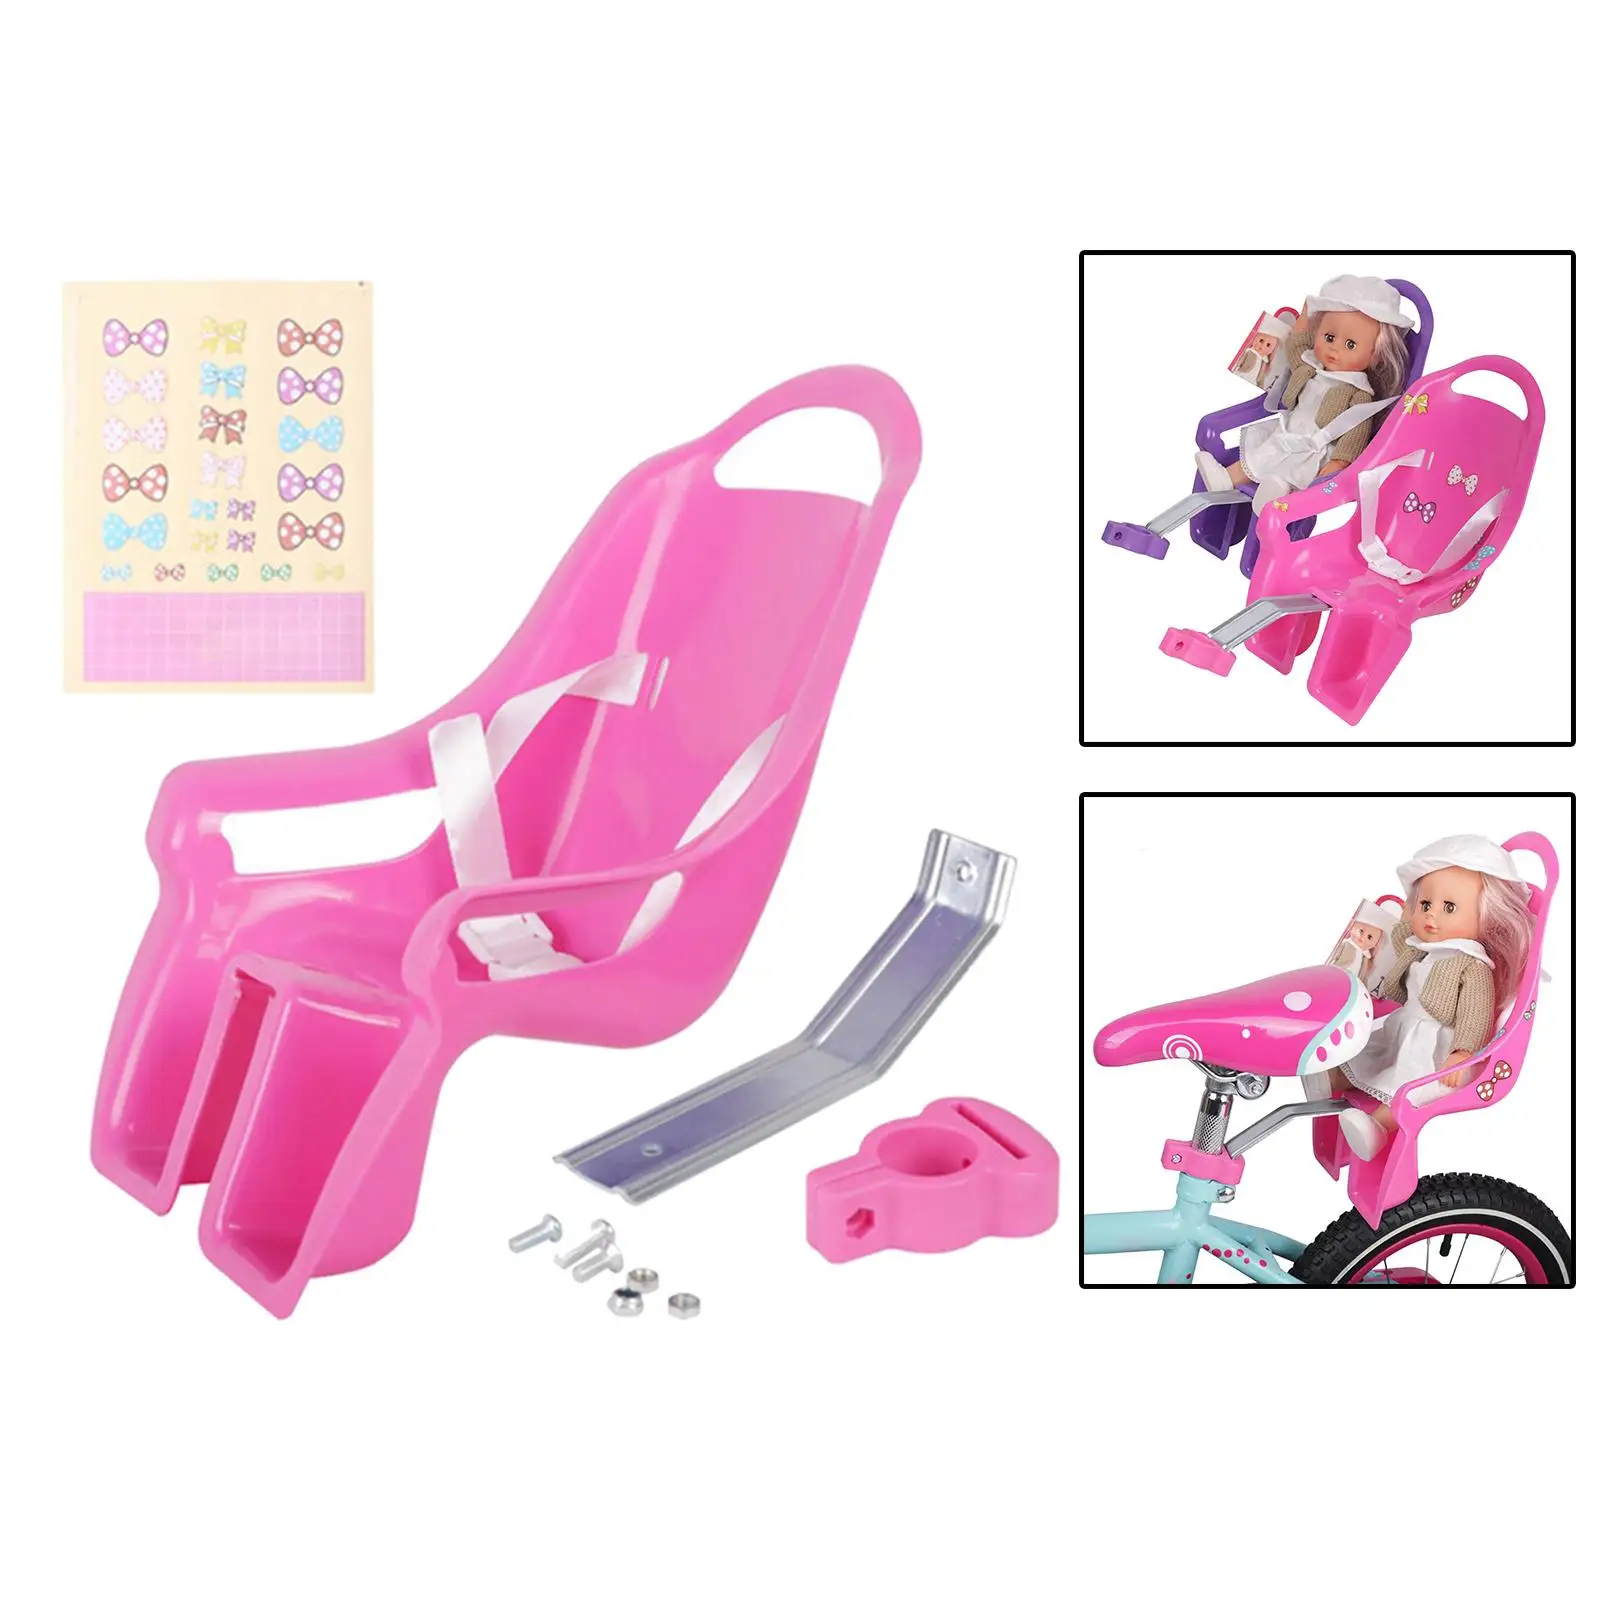 Girls Bike Doll Seat Bicycle Accessories with DIY Decals Bike Decoration for Girls